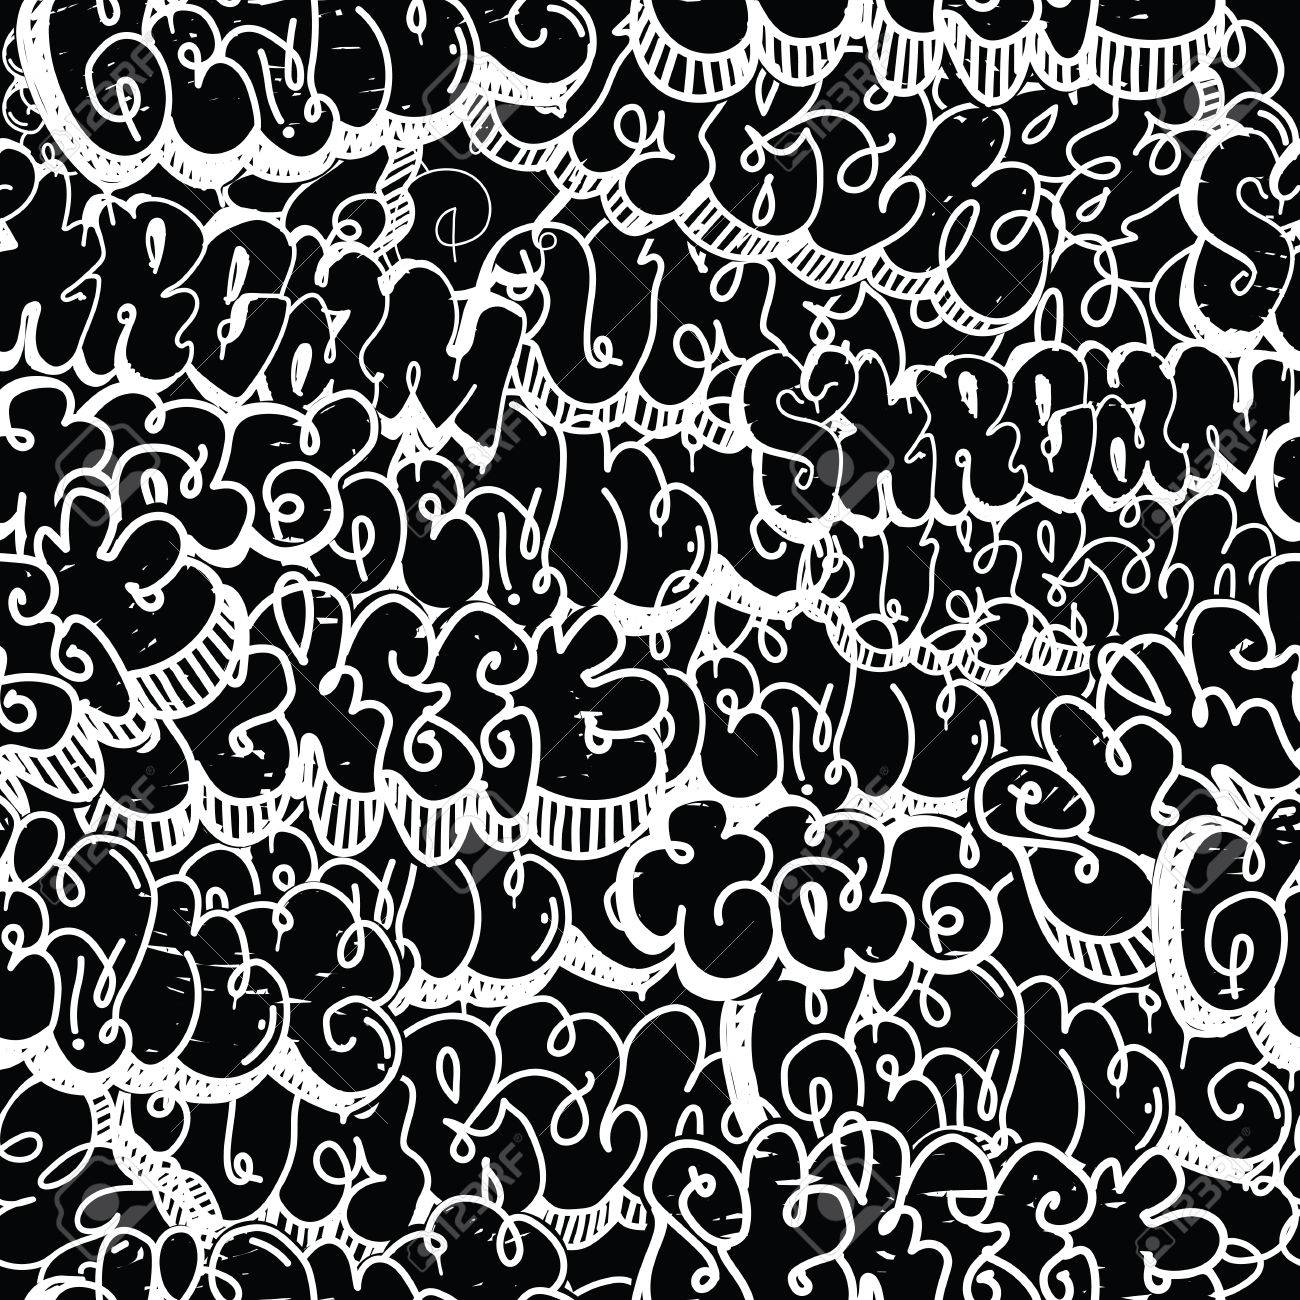 Background Seamless Pattern Graffiti Tagging Handstyle Contrast